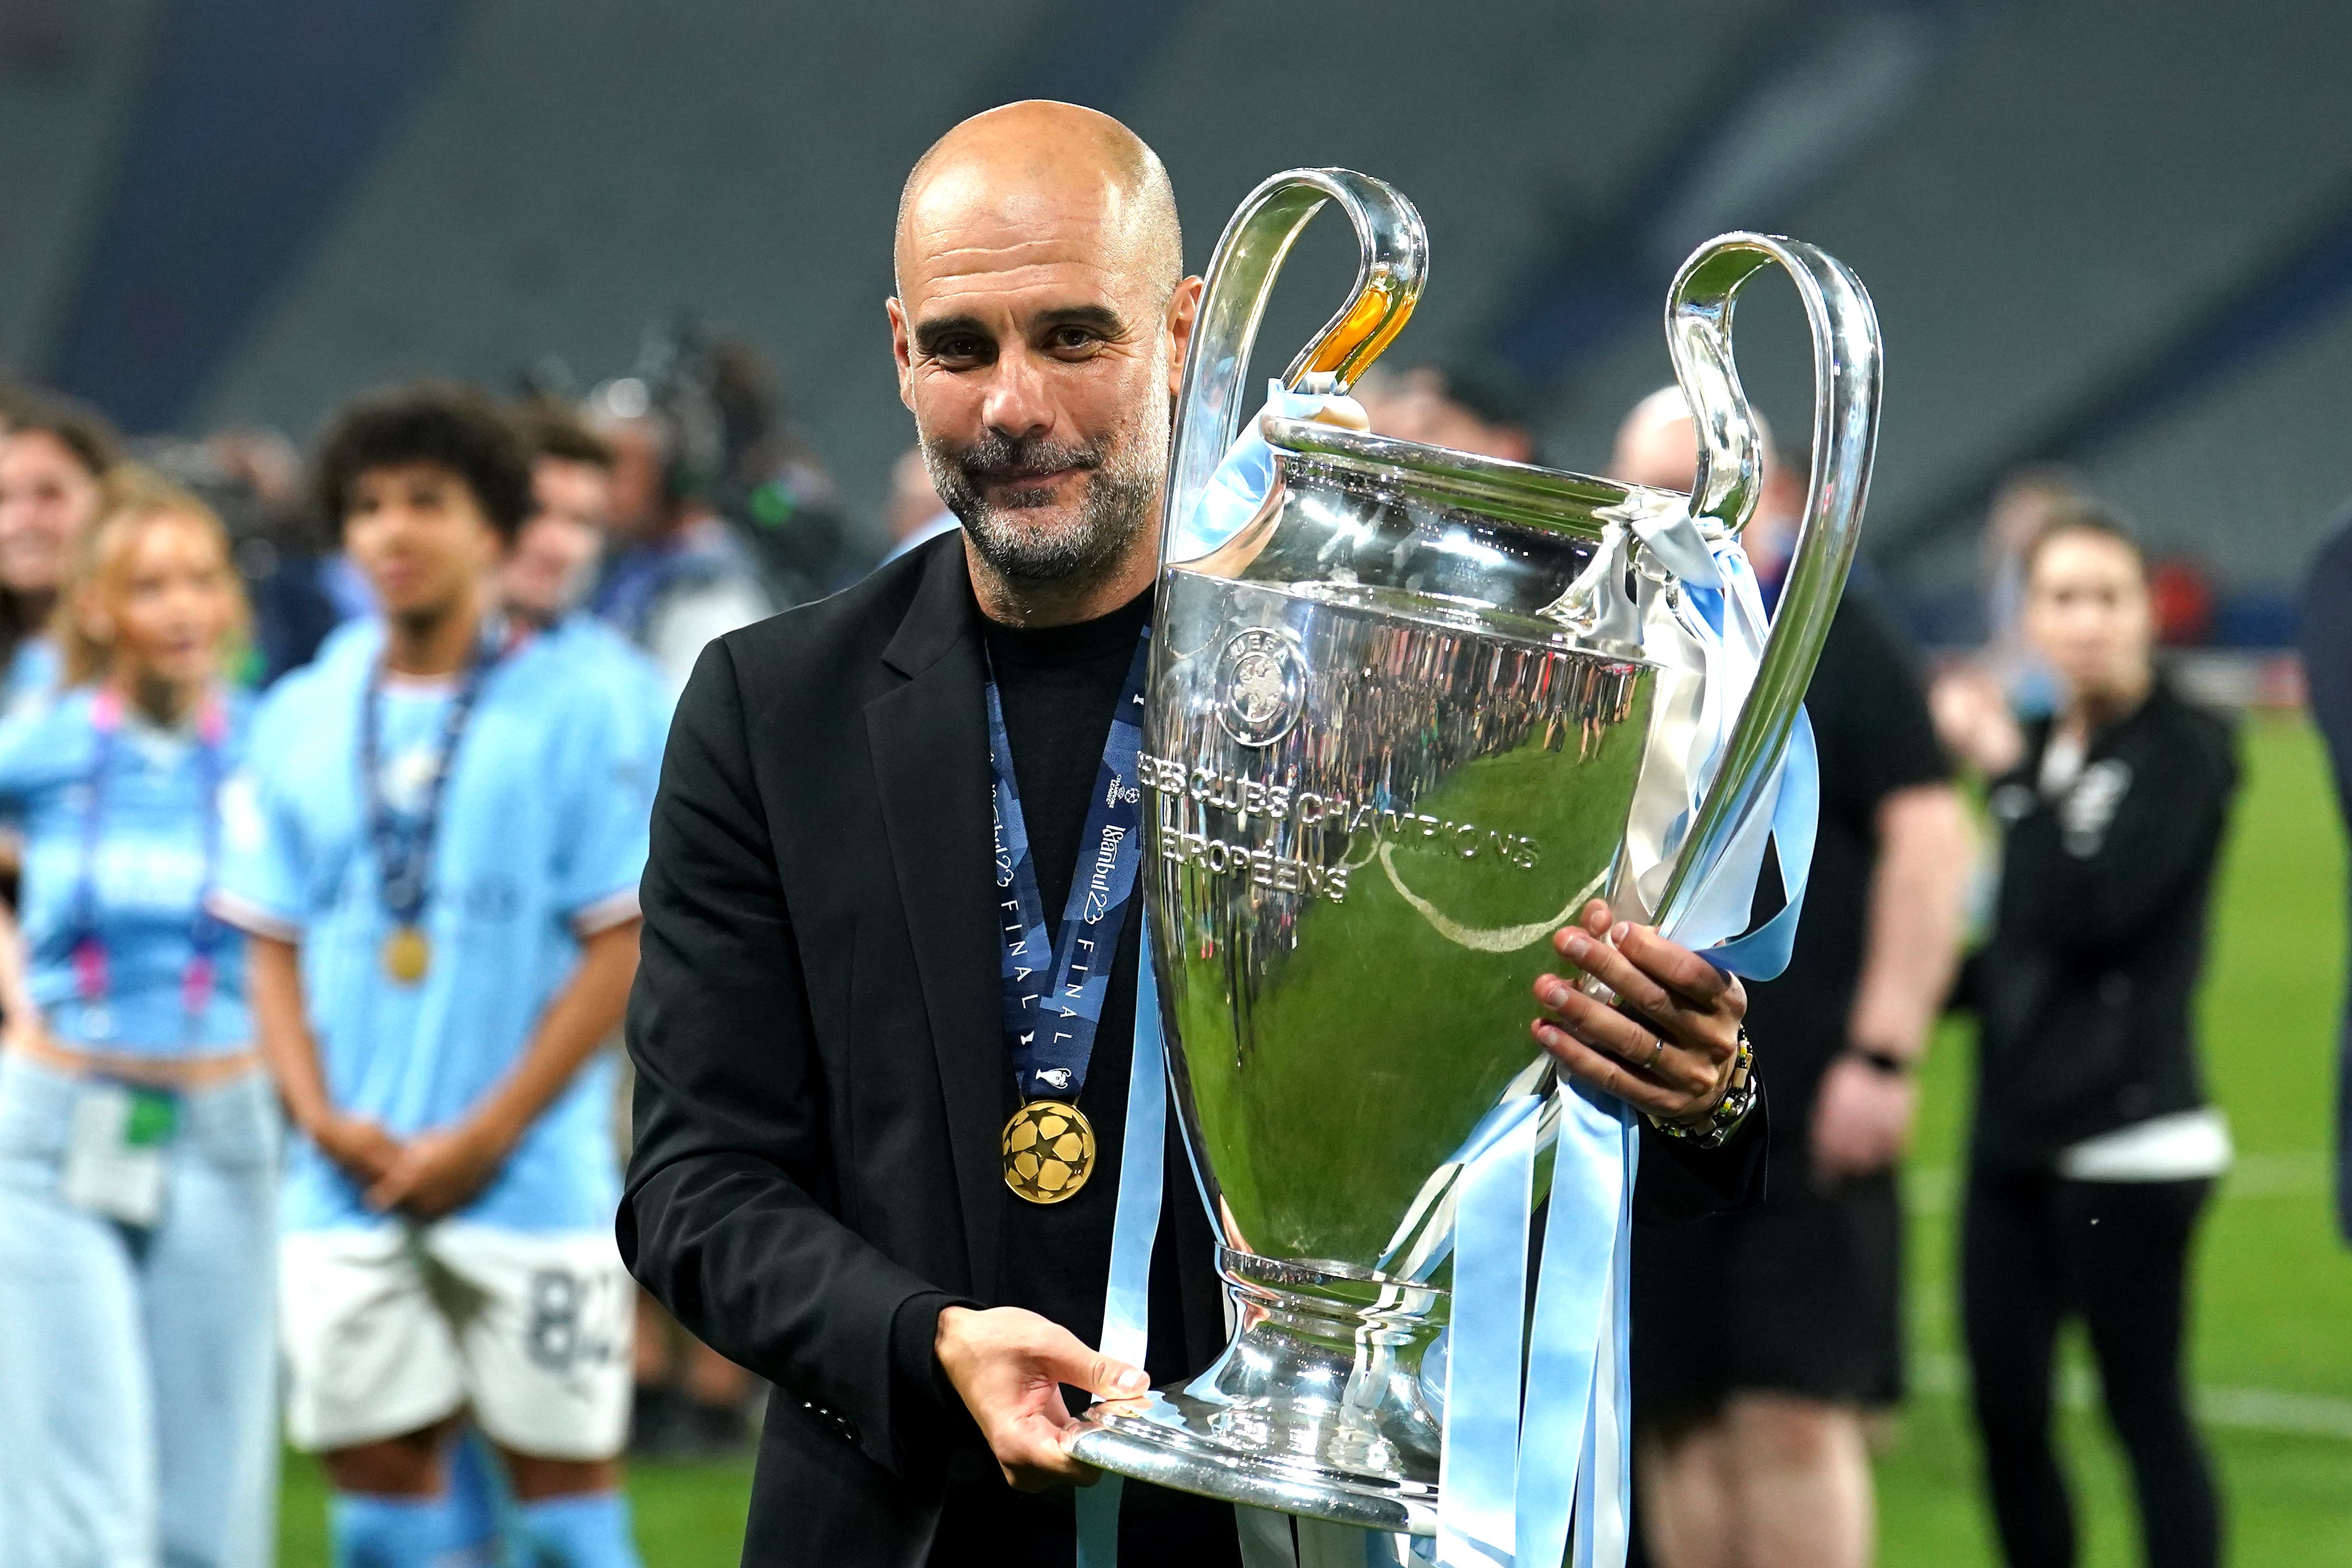  Pep Guardiola celebrates with the Champions League trophy after Manchester City's victory.